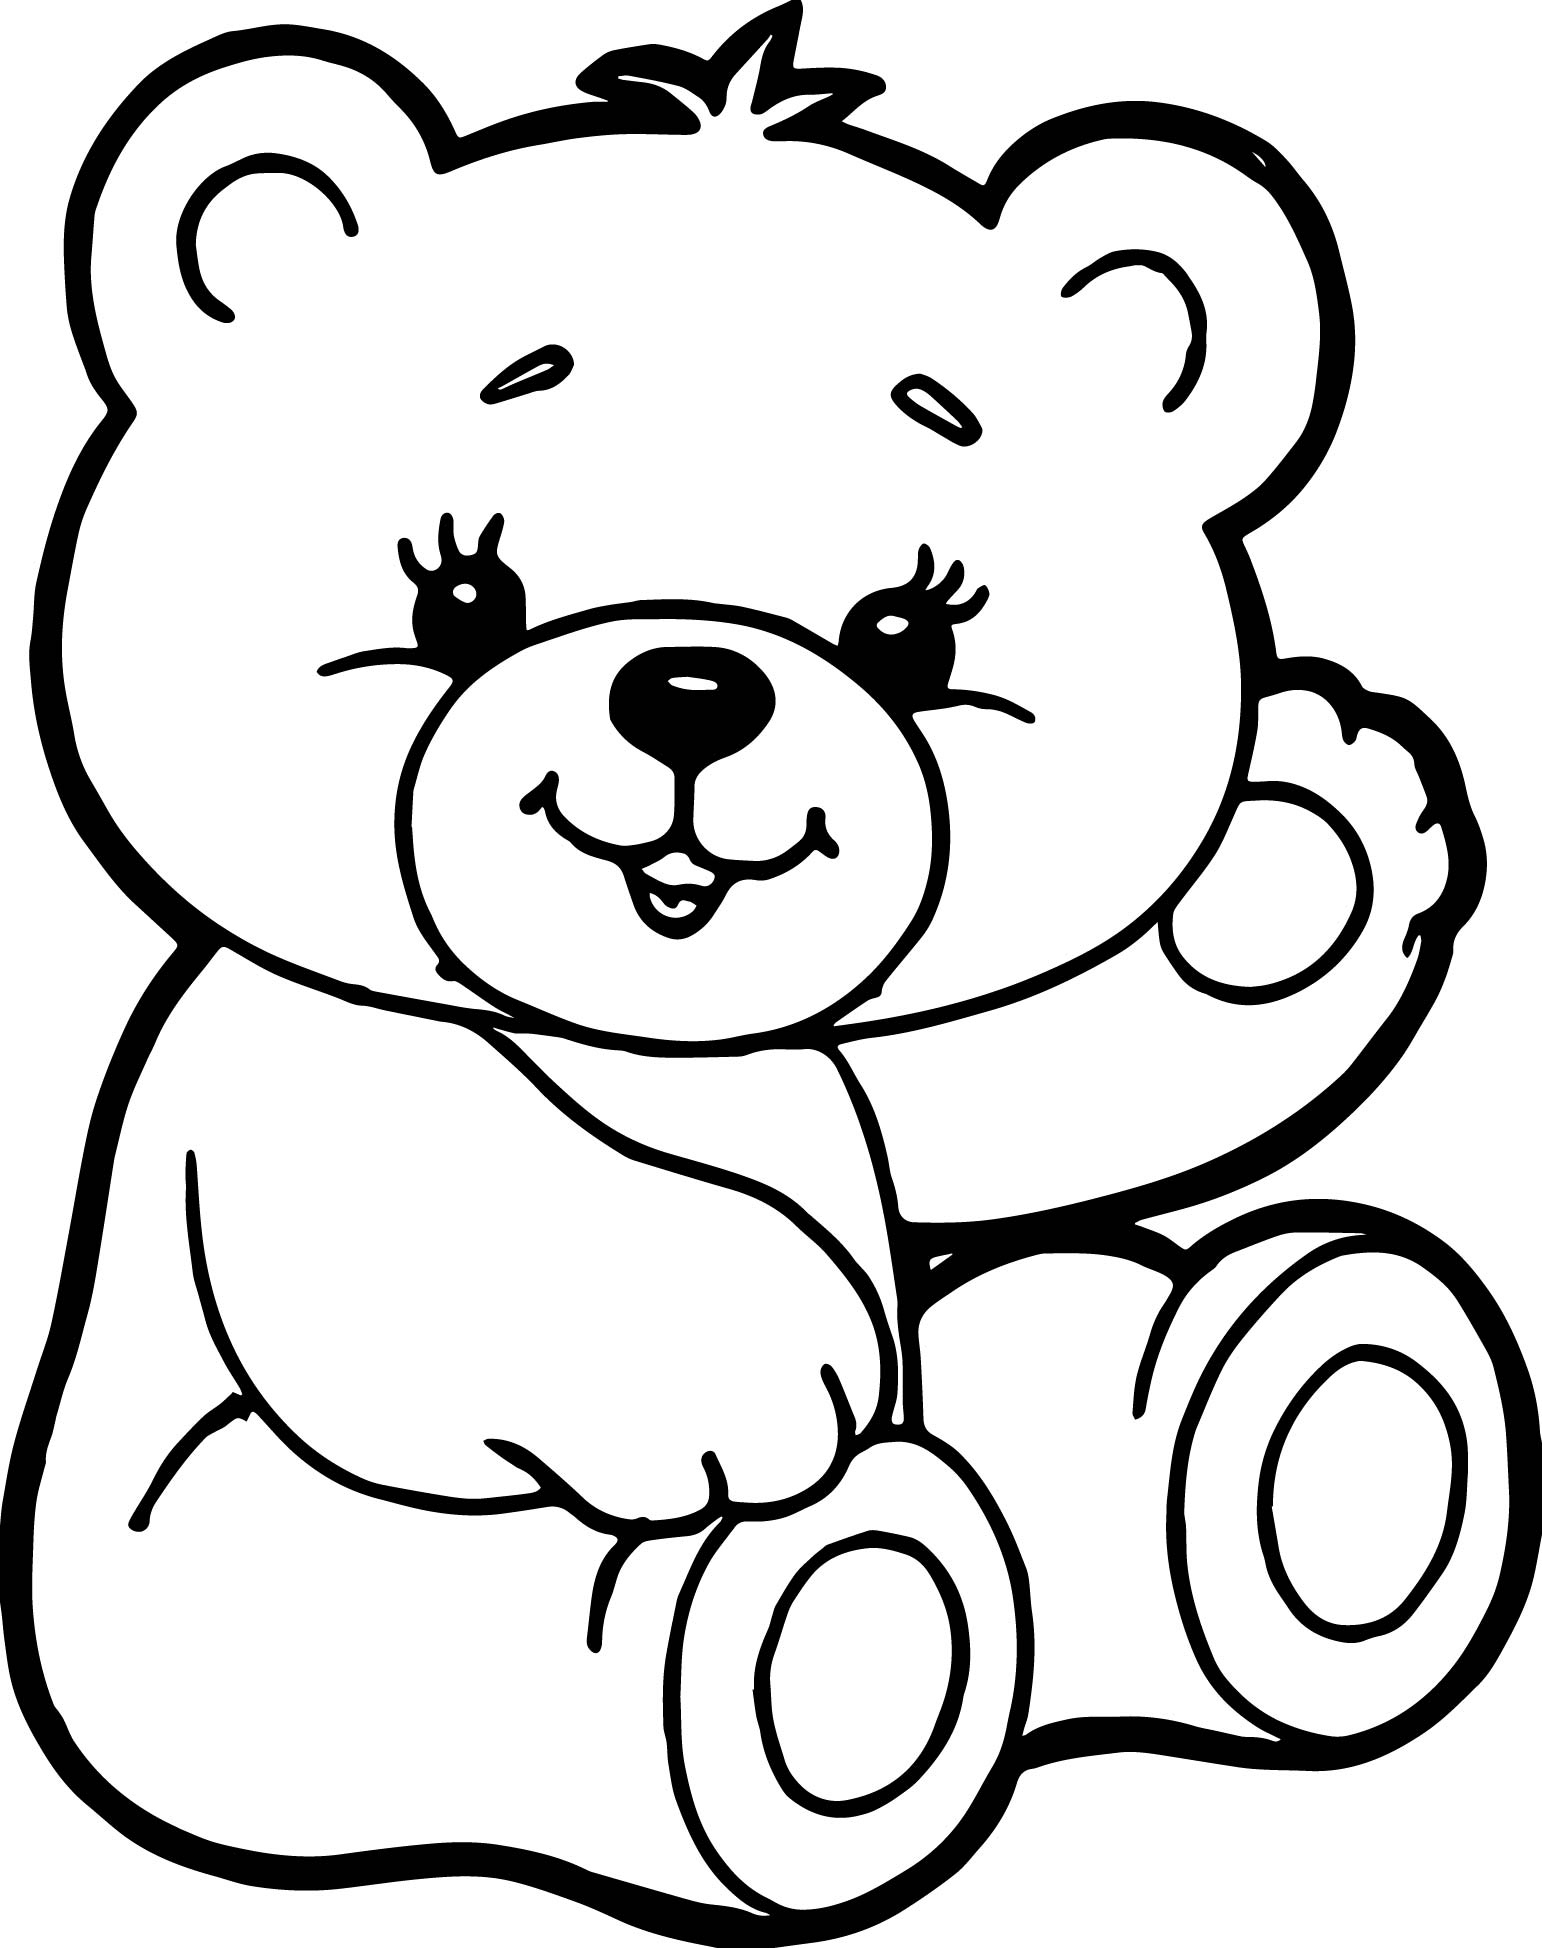 Bear Face Coloring Pages at Free printable colorings